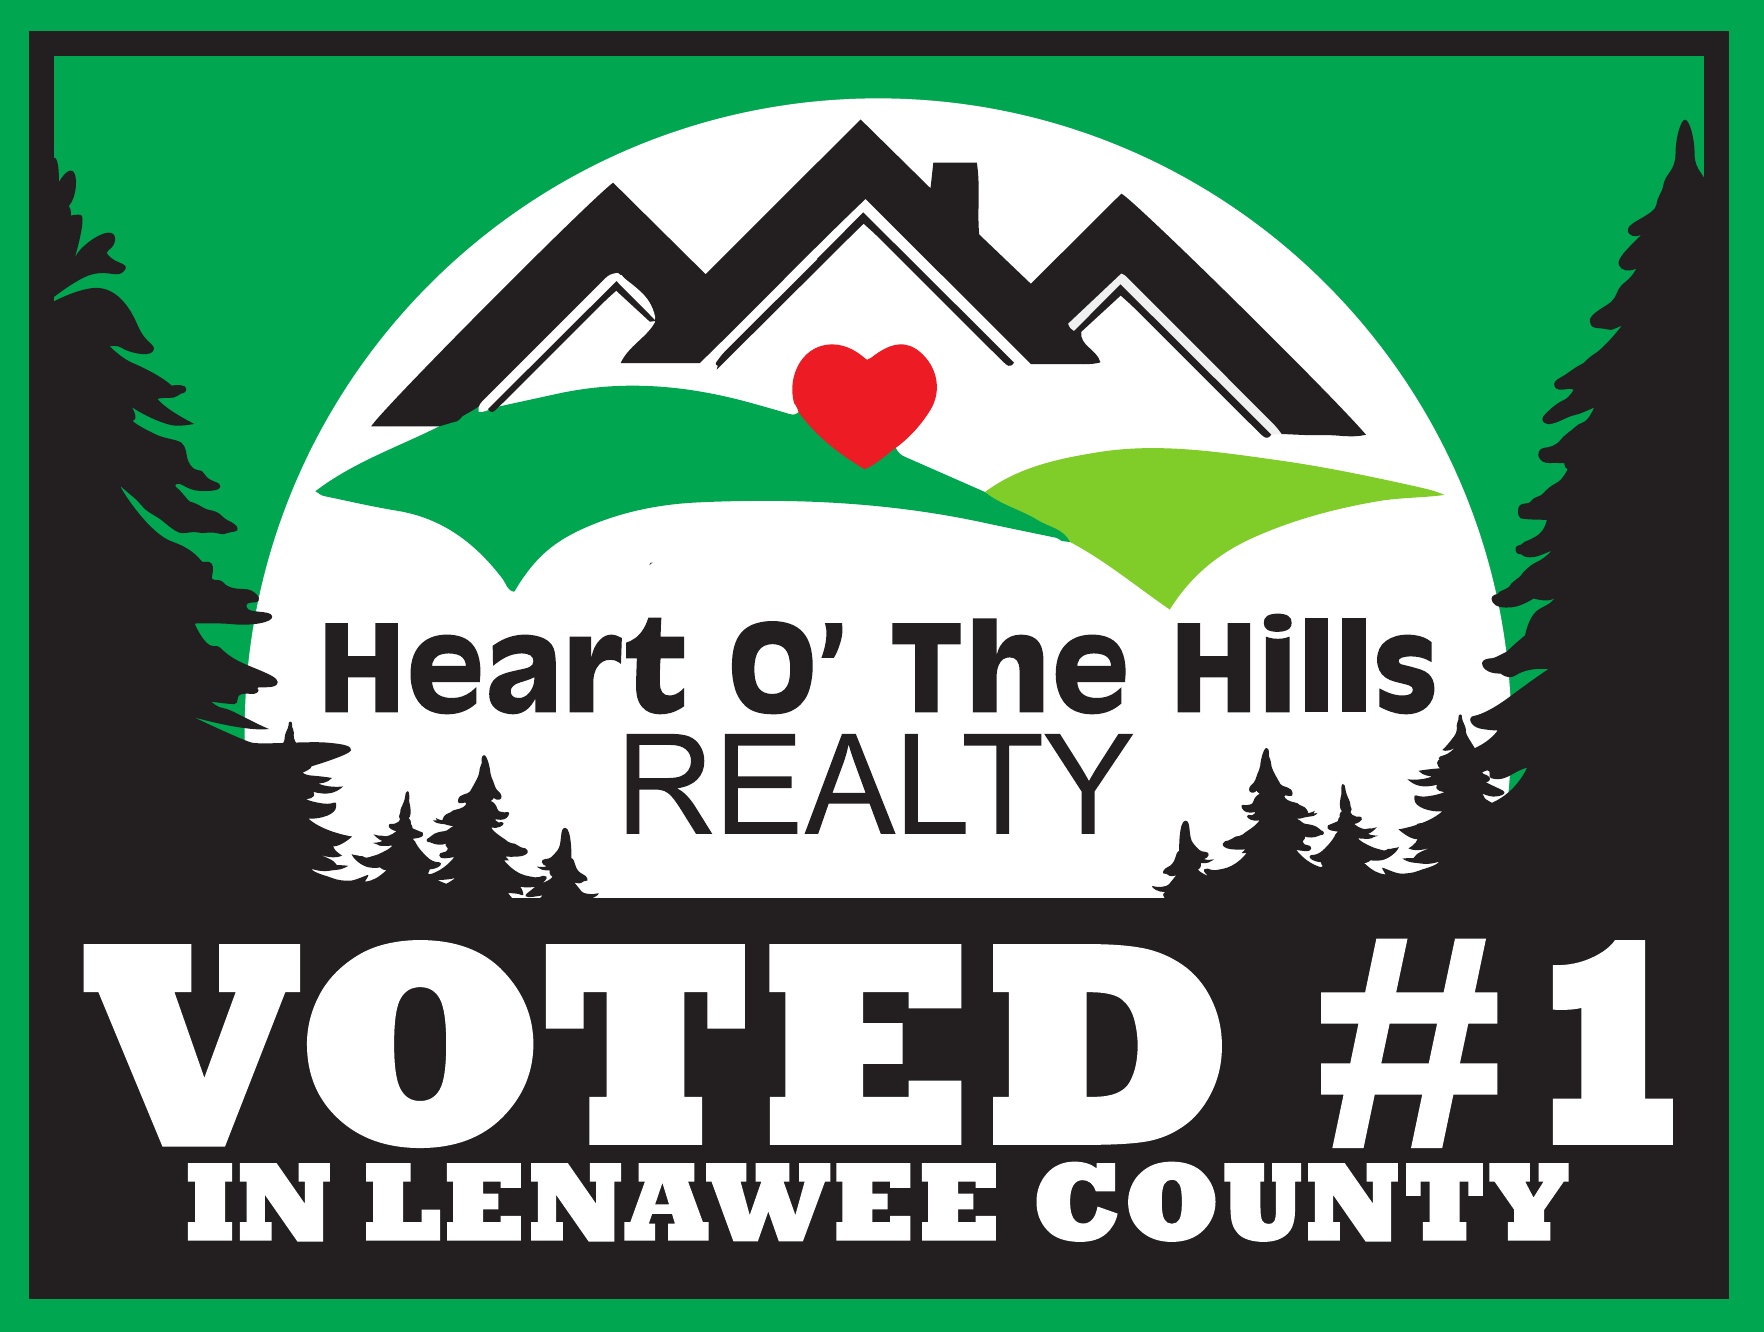 Heart O' The Hills Realty